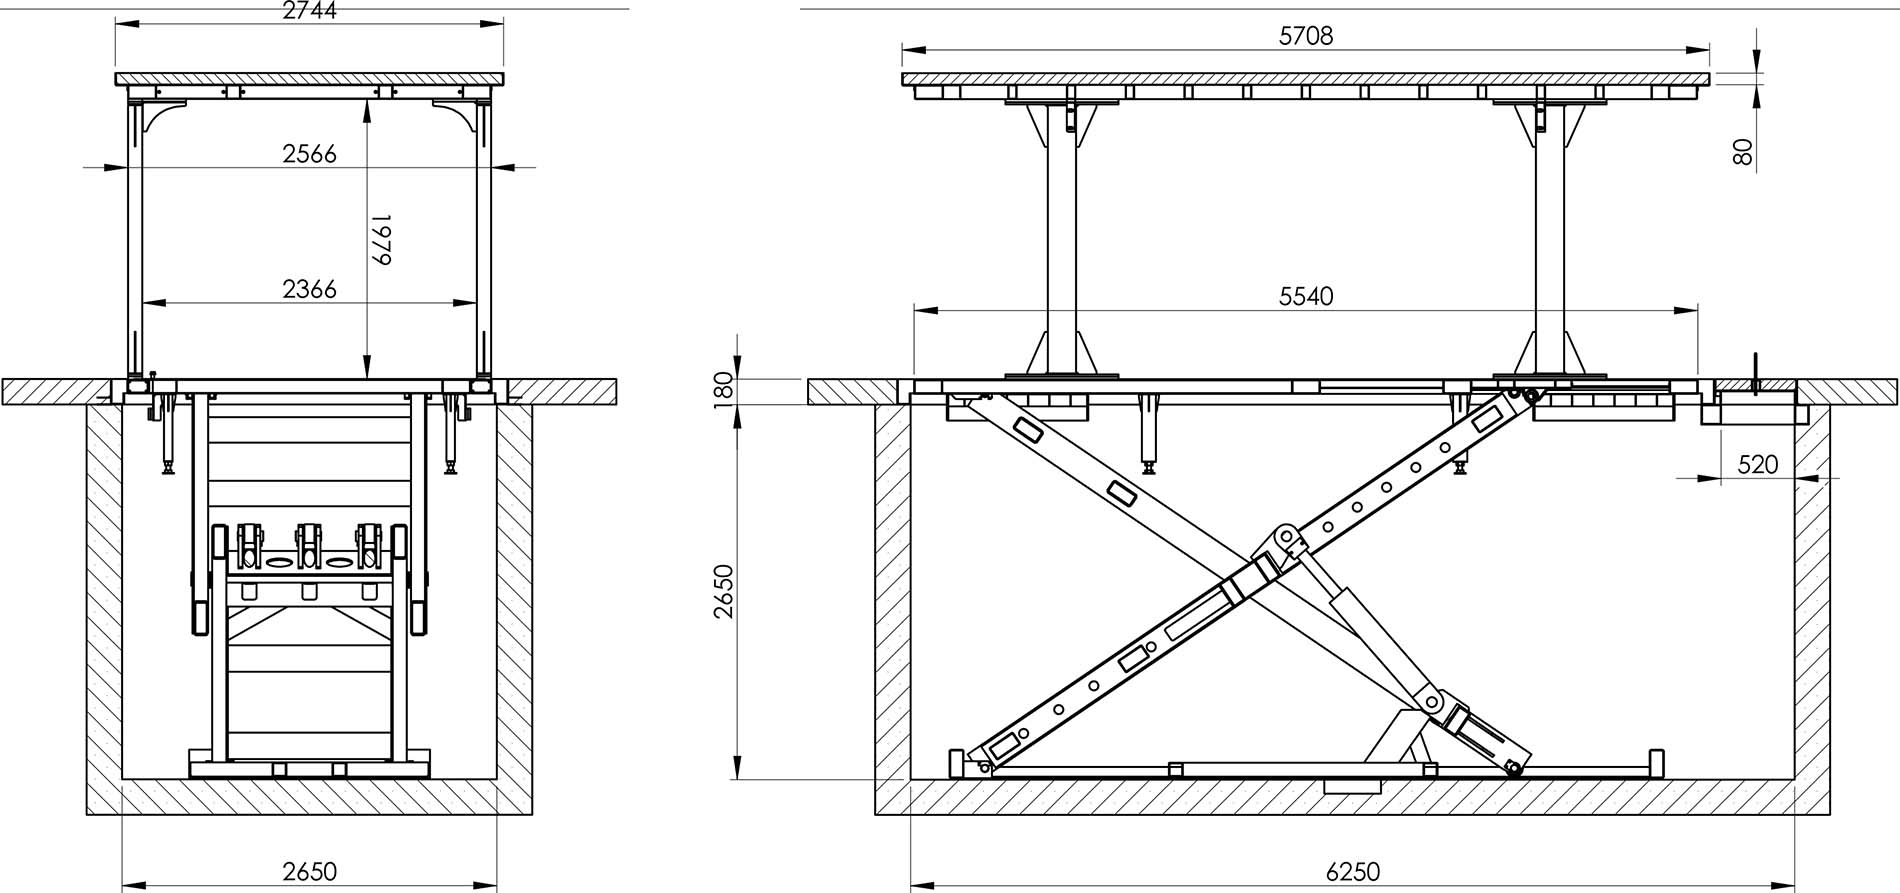 Underground garage - technical drawing with dimensions 